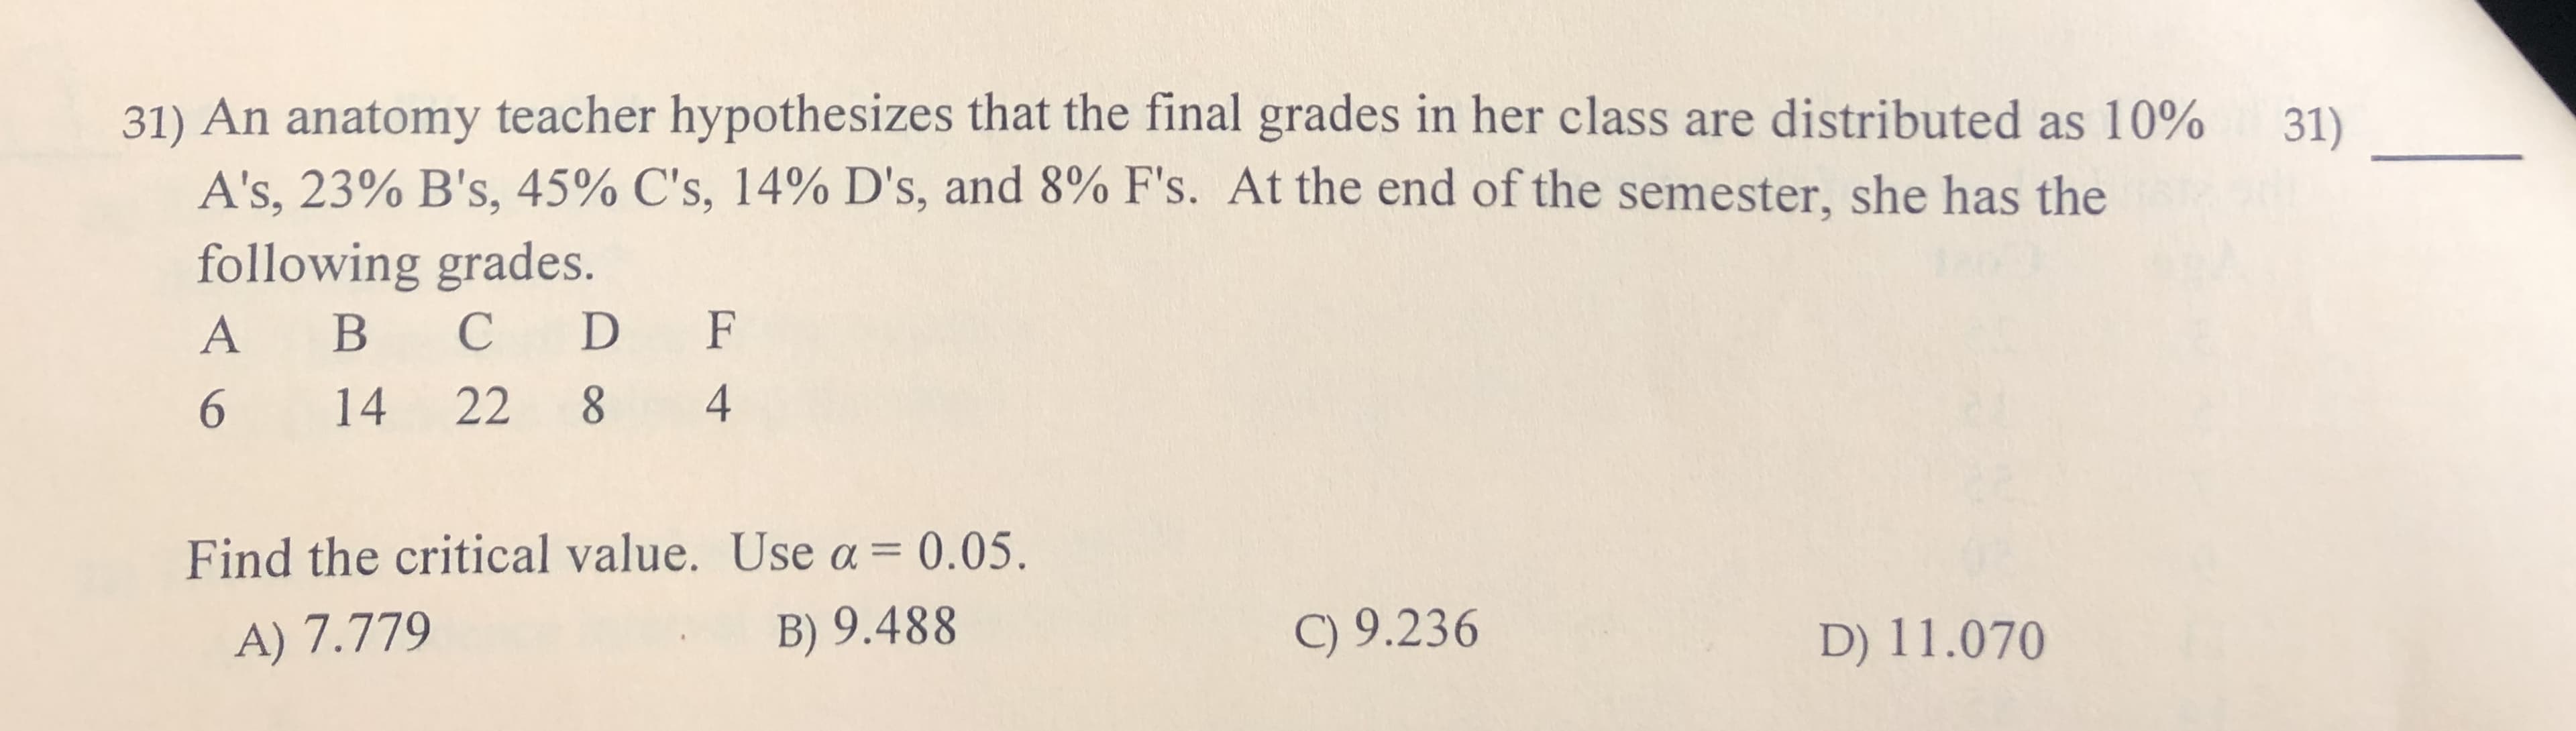 31) An anatomy teacher hypothesizes that the final grades in her class are distributed as 10%
A's, 23% B's, 45% C's, 14 % D's, and 8% F's. At the end of the semester, she has the
31)
following grades.
D F
C
B
8 4
14 22
6
Find the critical value. Use a = 0.05.
B) 9.488
C) 9.236
D) 11.070
A) 7.779
